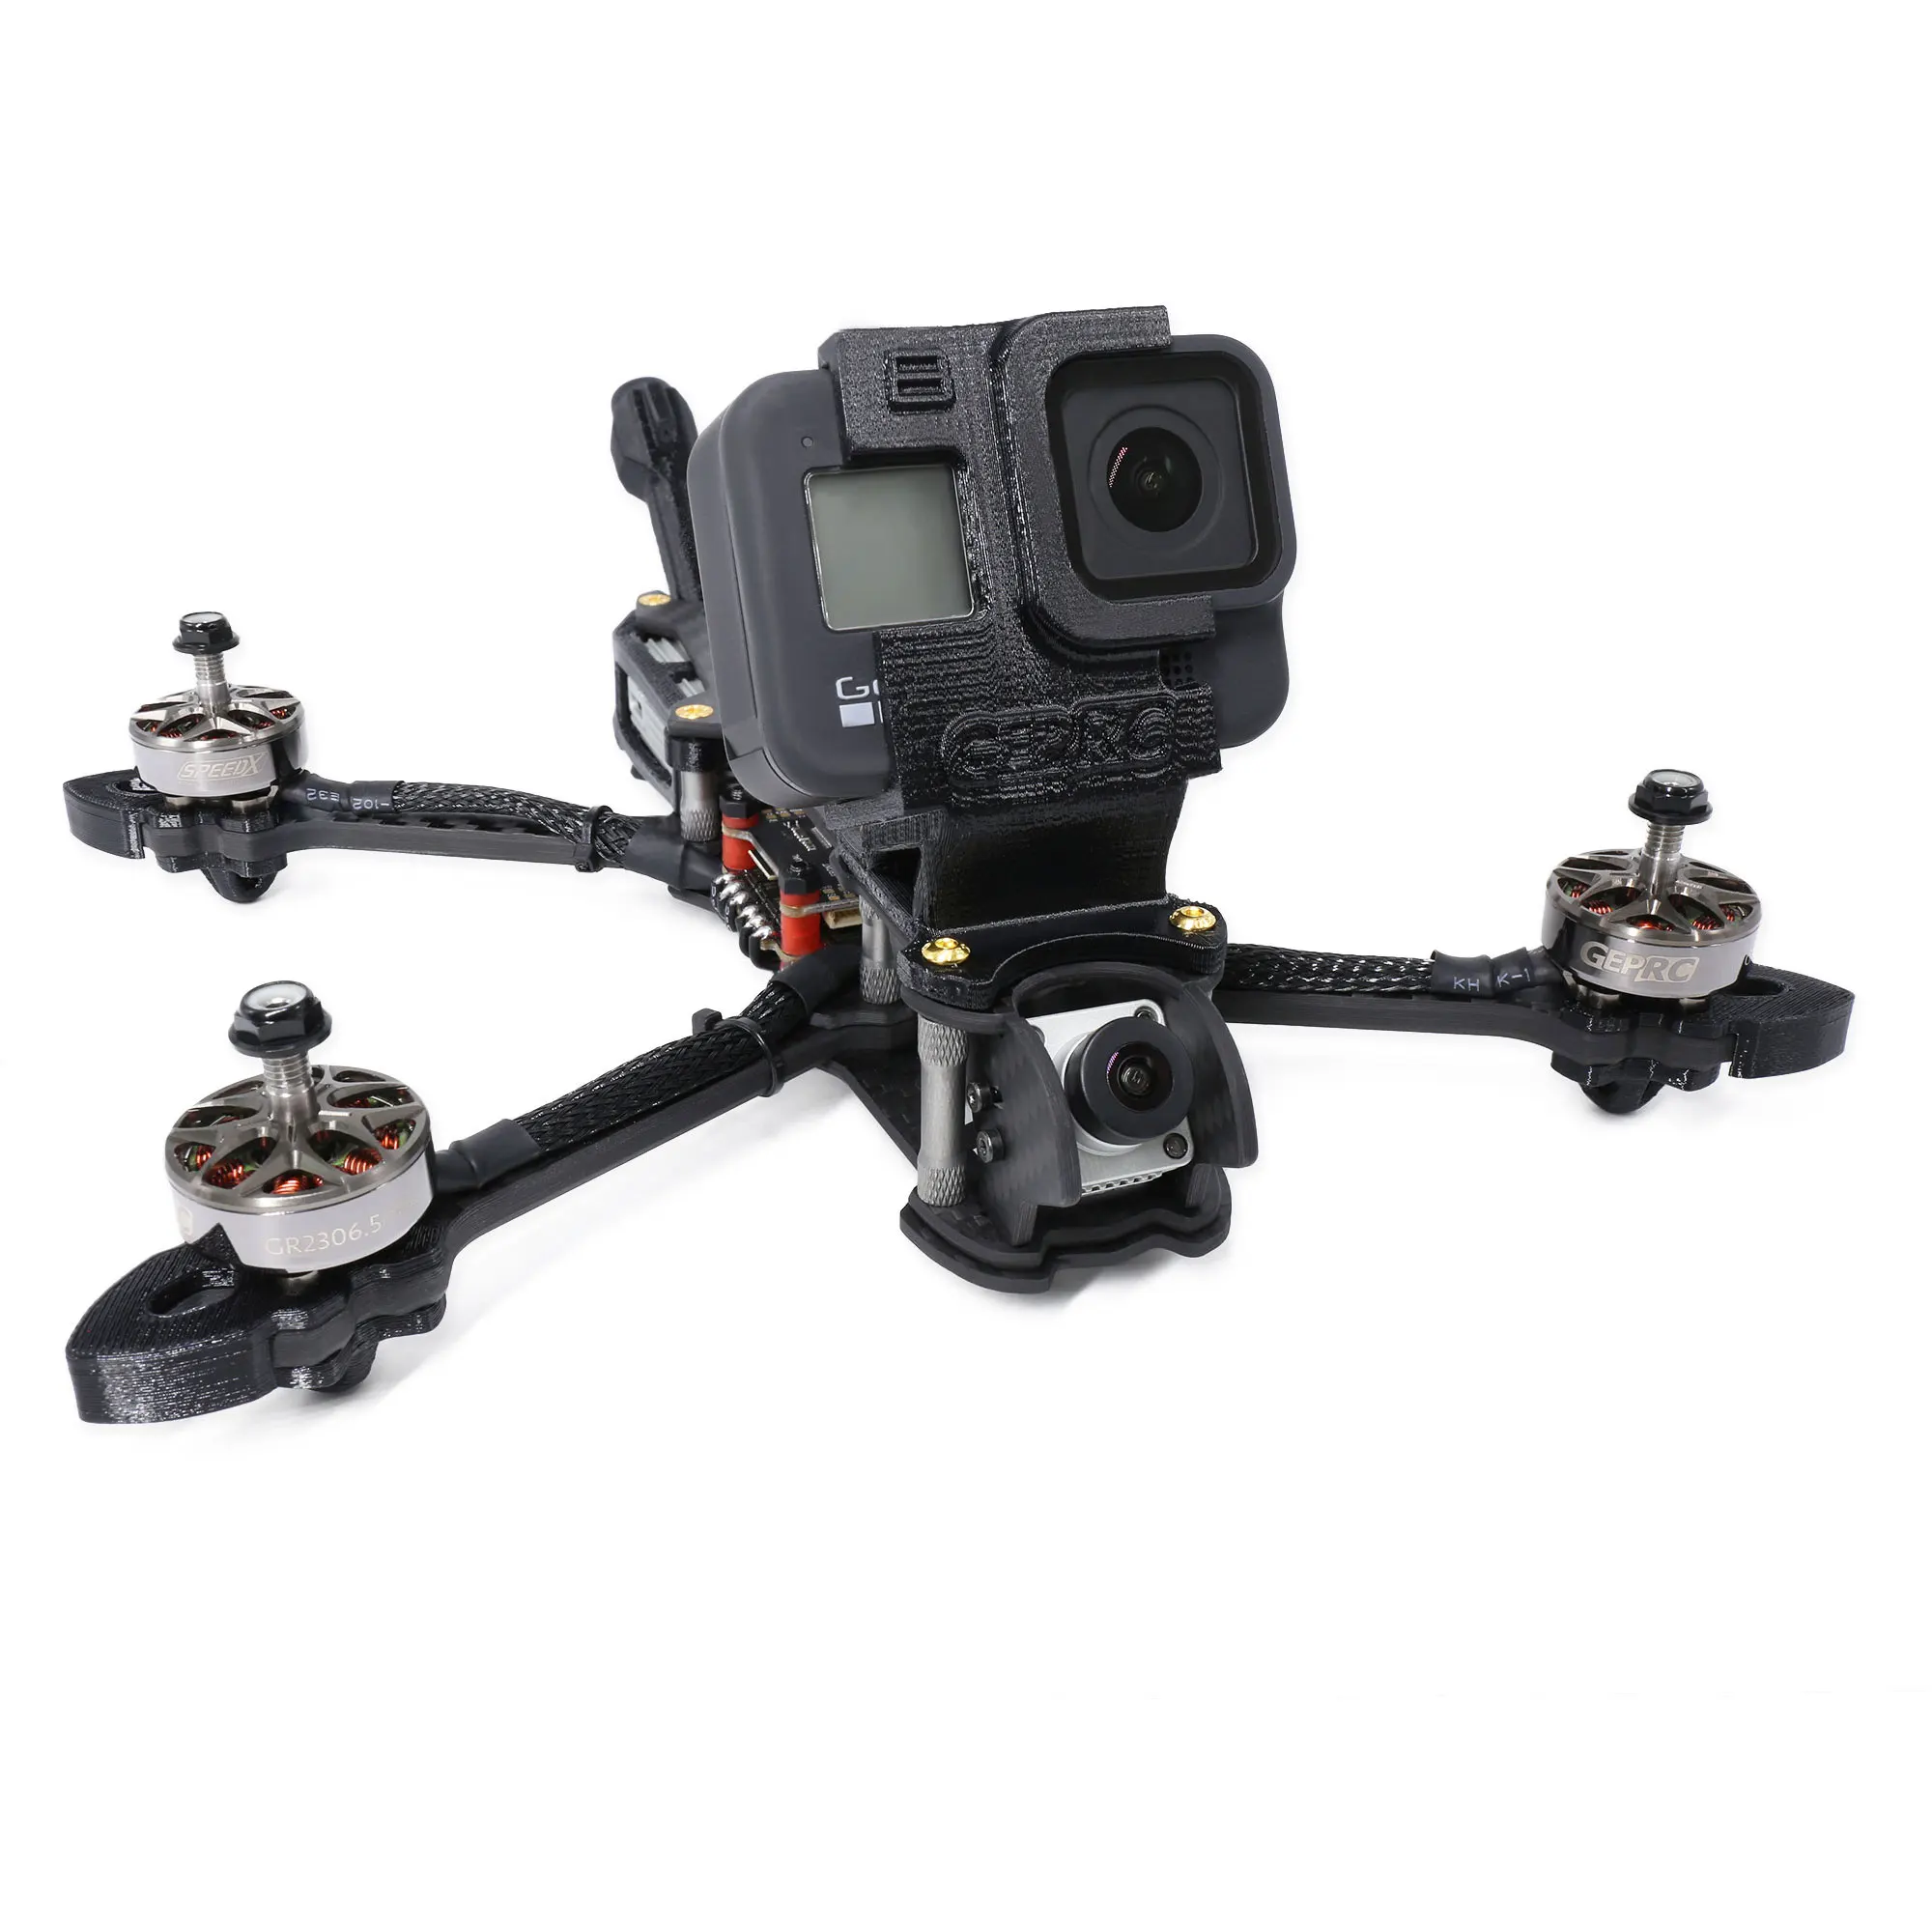 3DPOWER x TBS HD GOPRO Session Kit v2 for TBS Oblivion TPU PARTS 